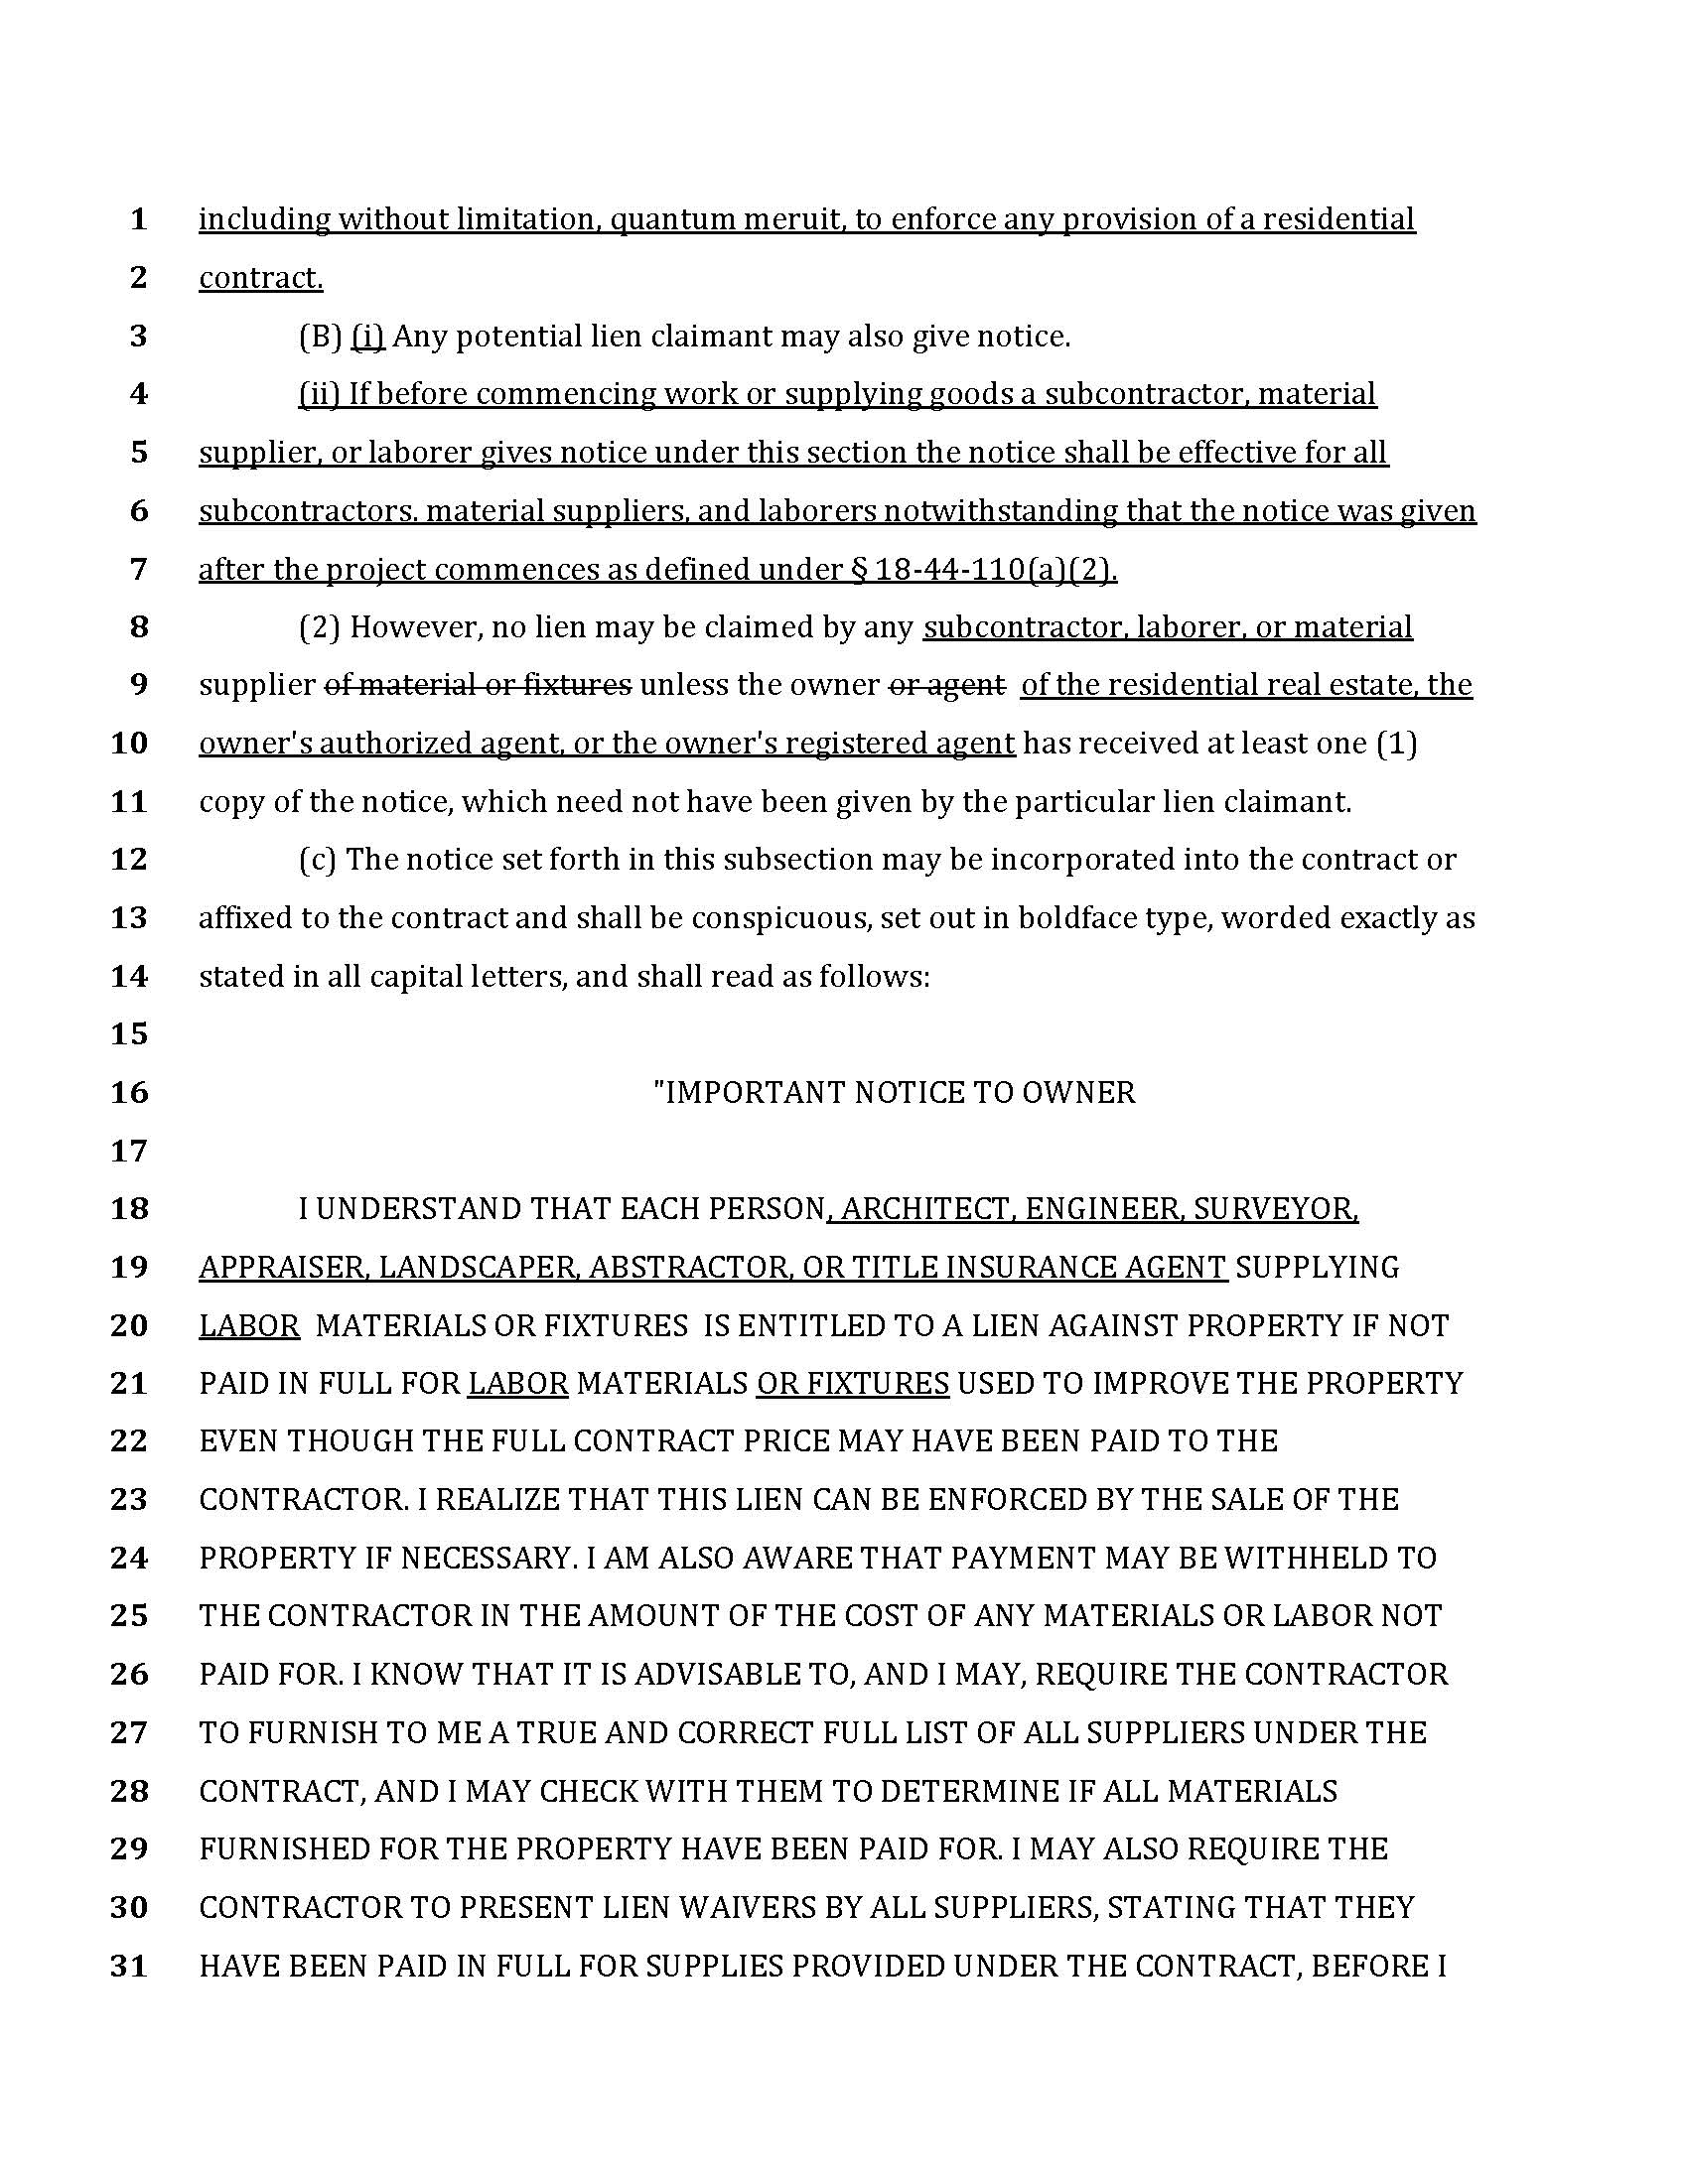 final-bill-lien-law-revisions_Page_06.jpg